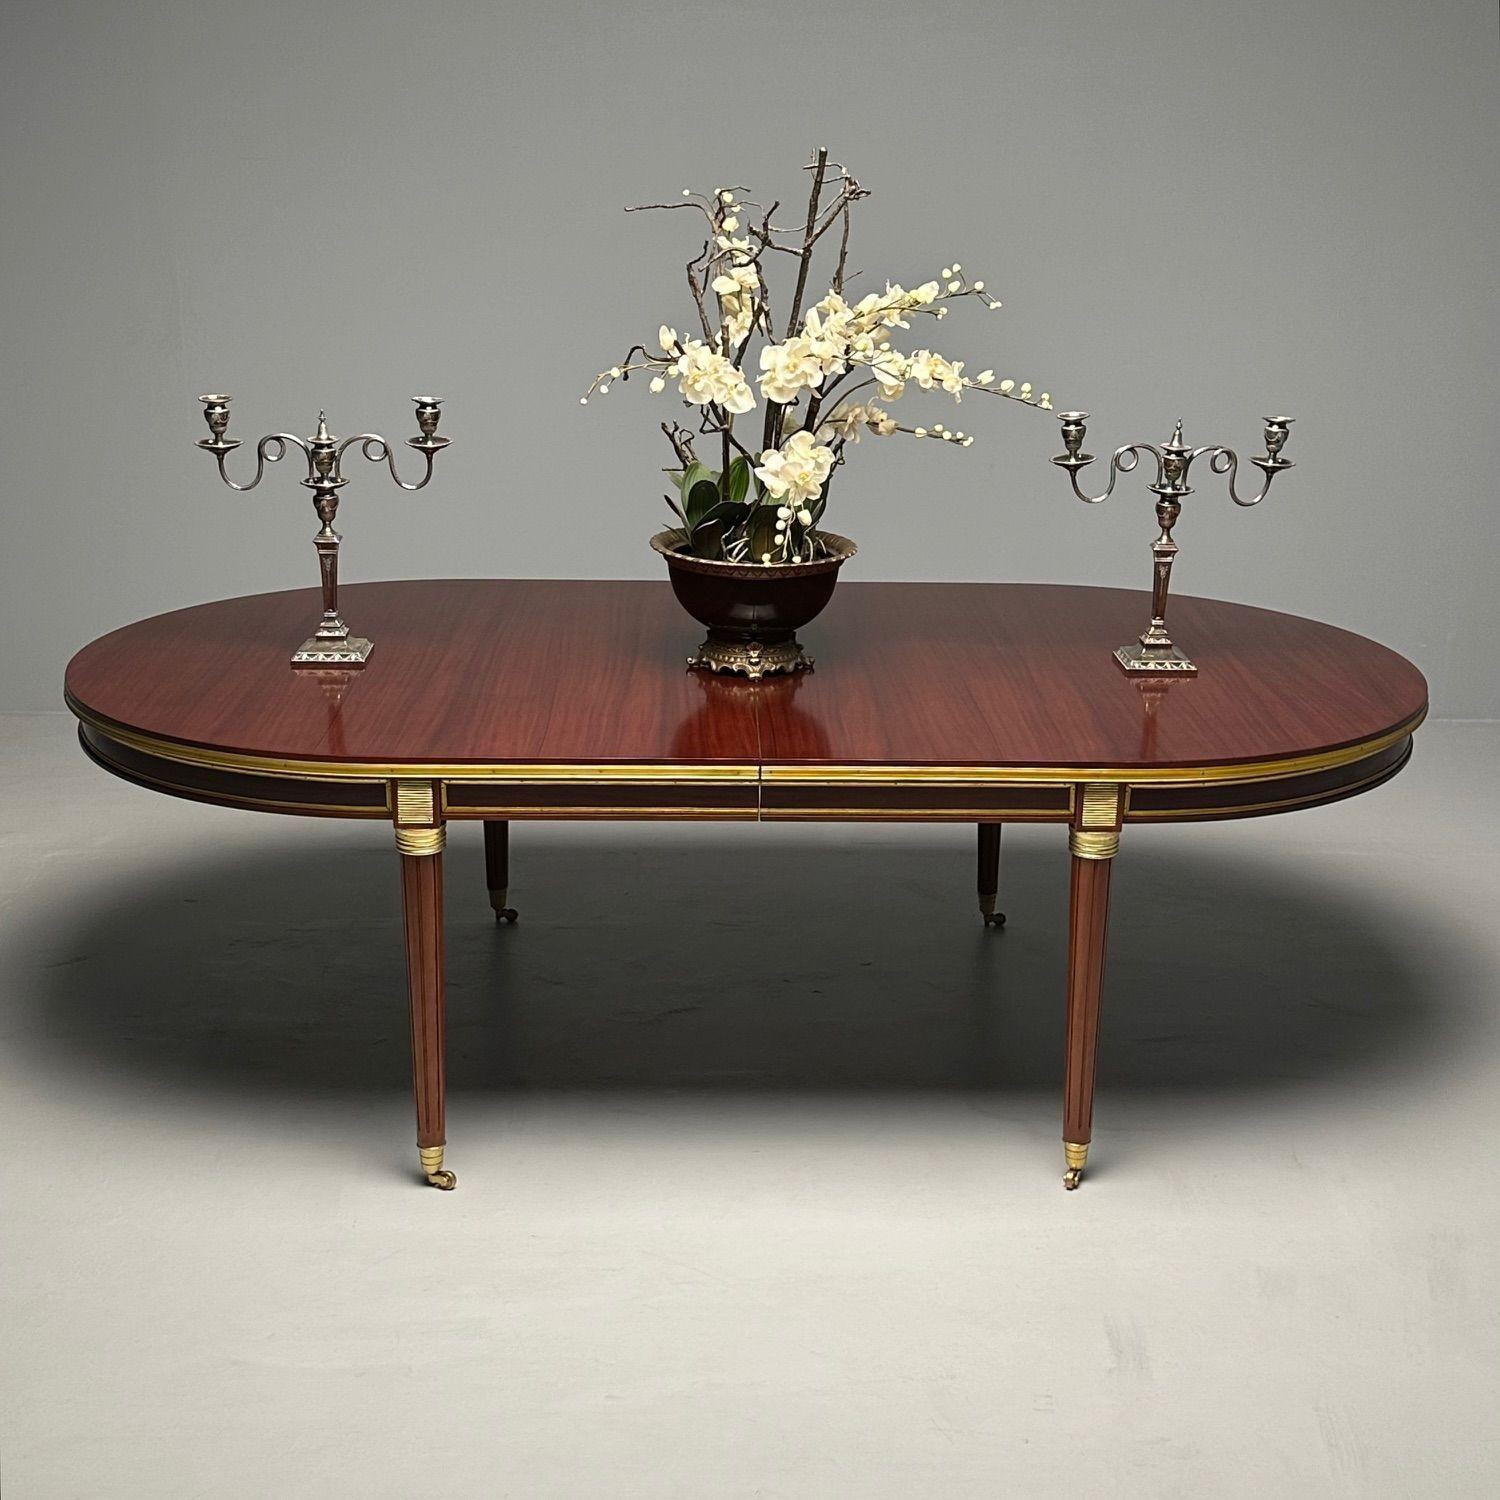 20th Century Monumental Louis XVI Hollywood Regency Dining Table, 15 Feet, Bronze Mounted For Sale